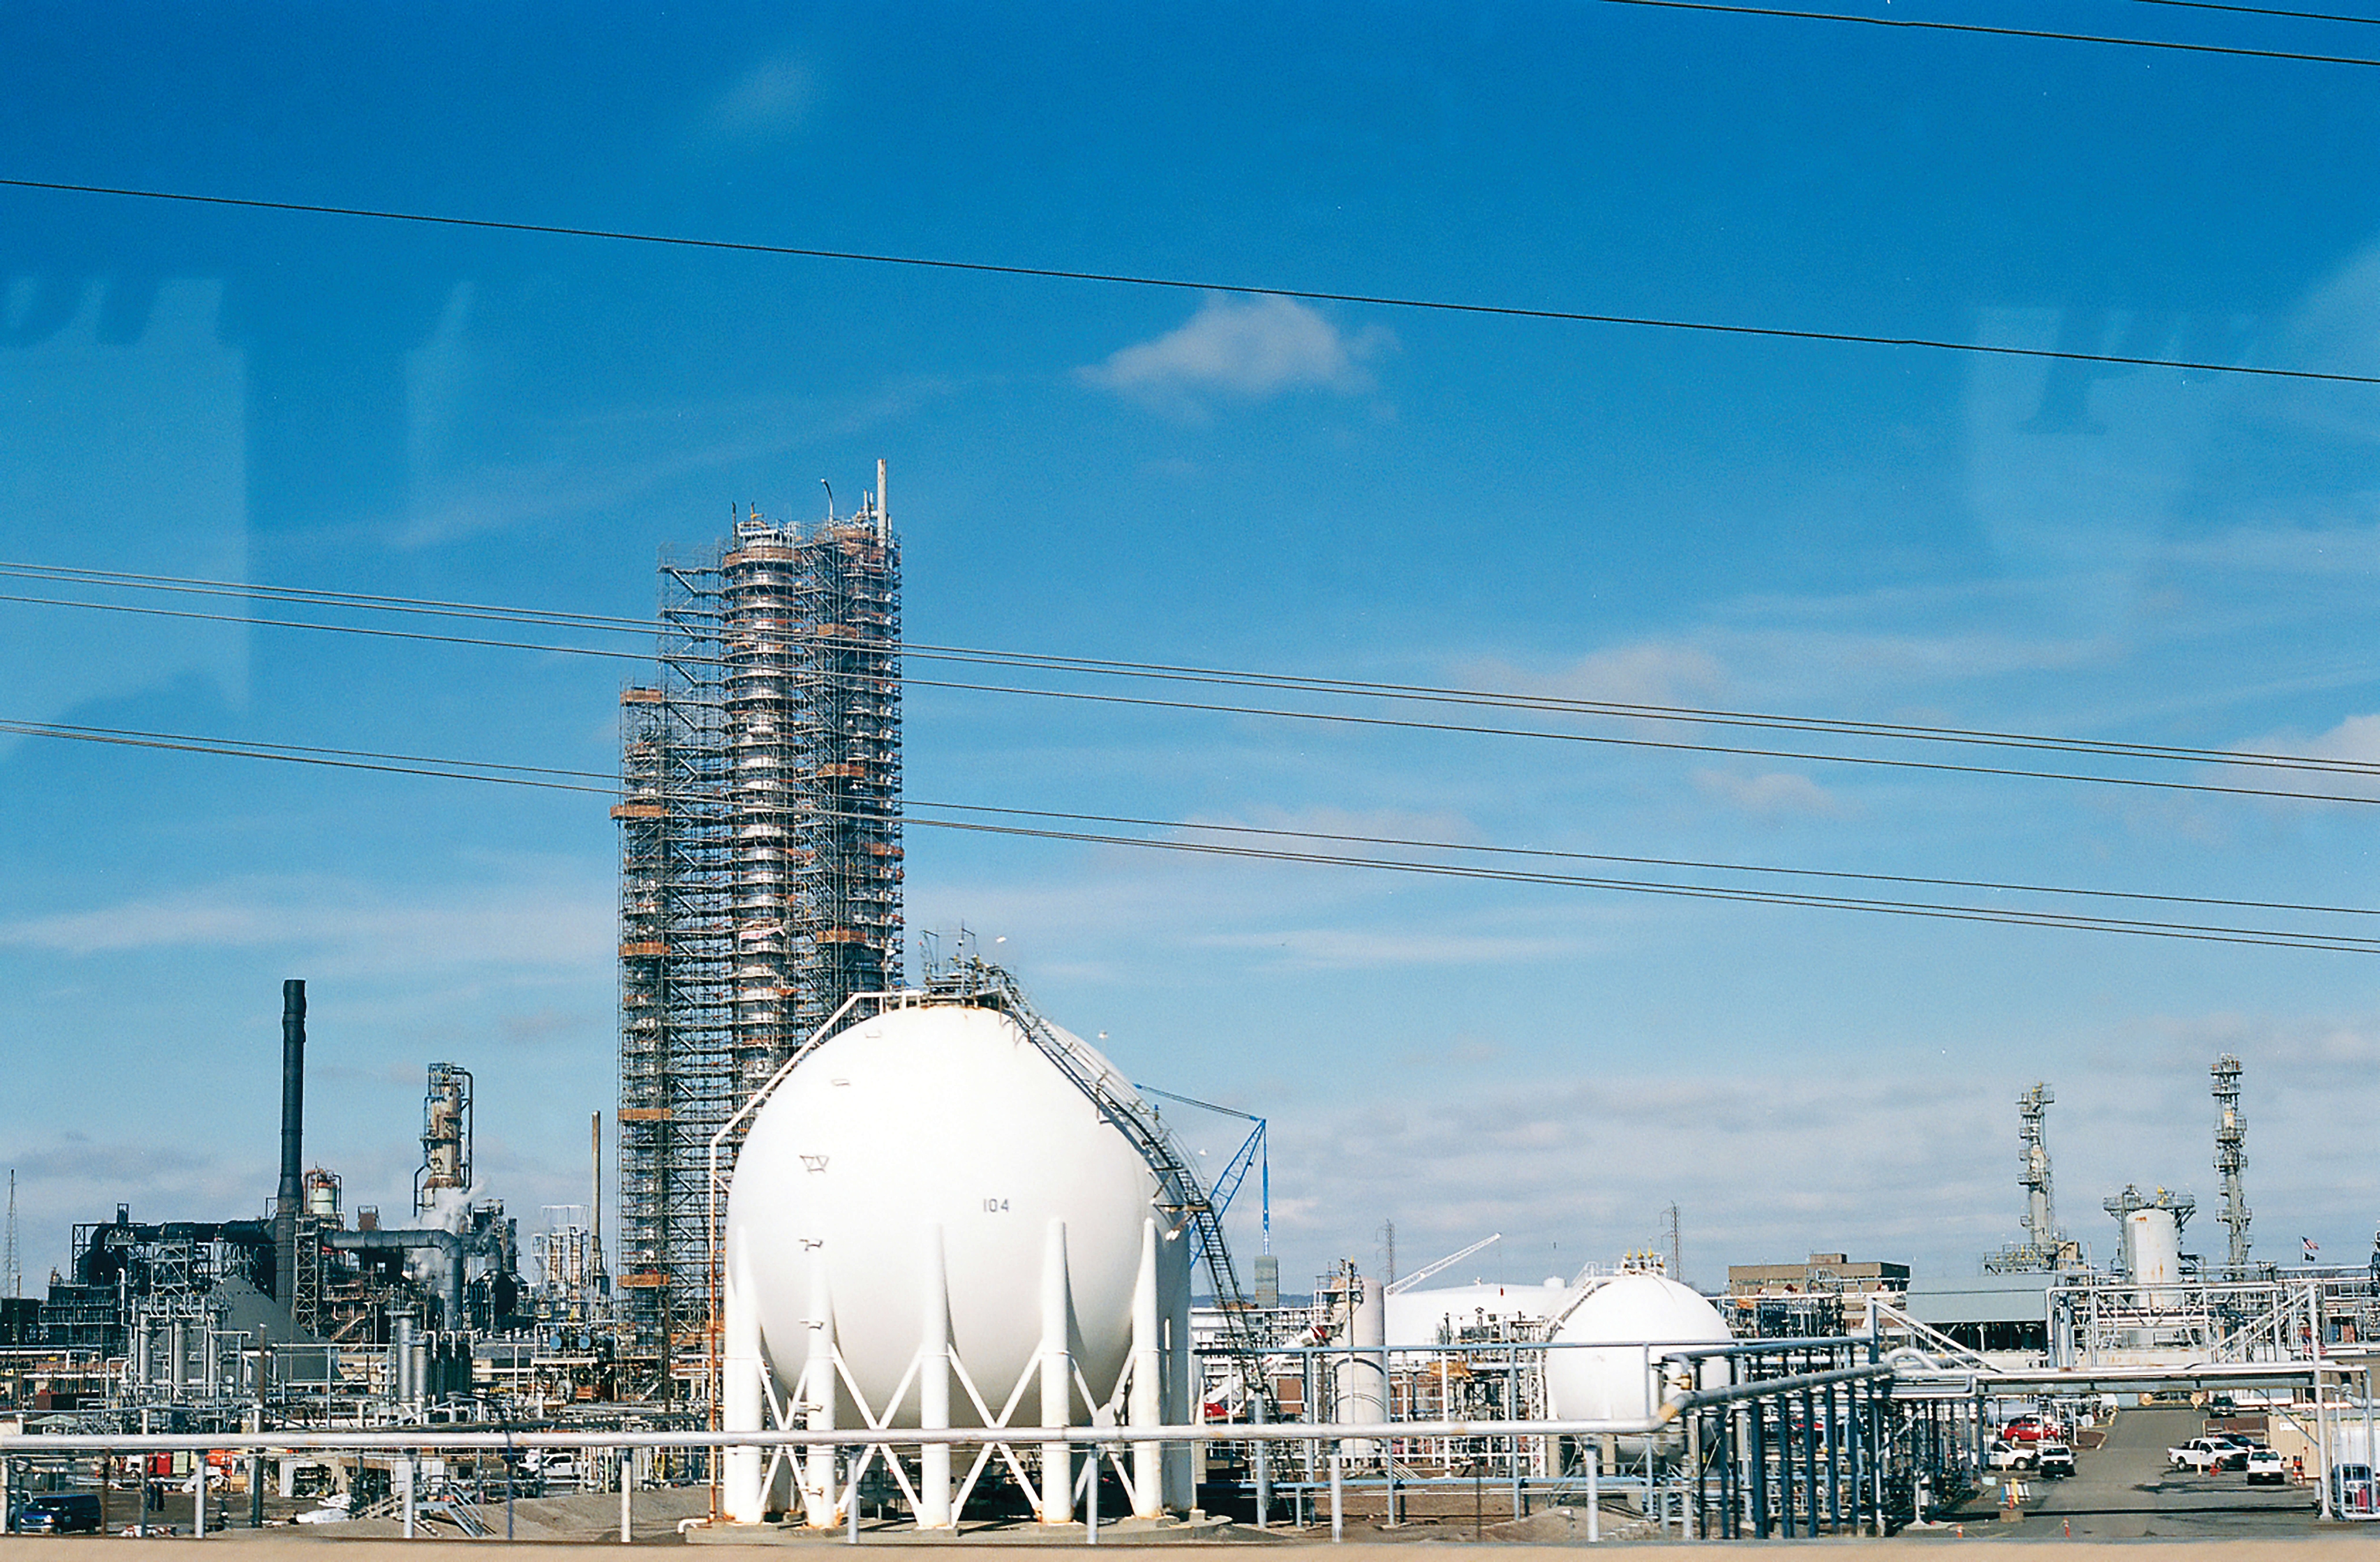 An image of a natural gas processing facility with an expansive blue sky in the background.